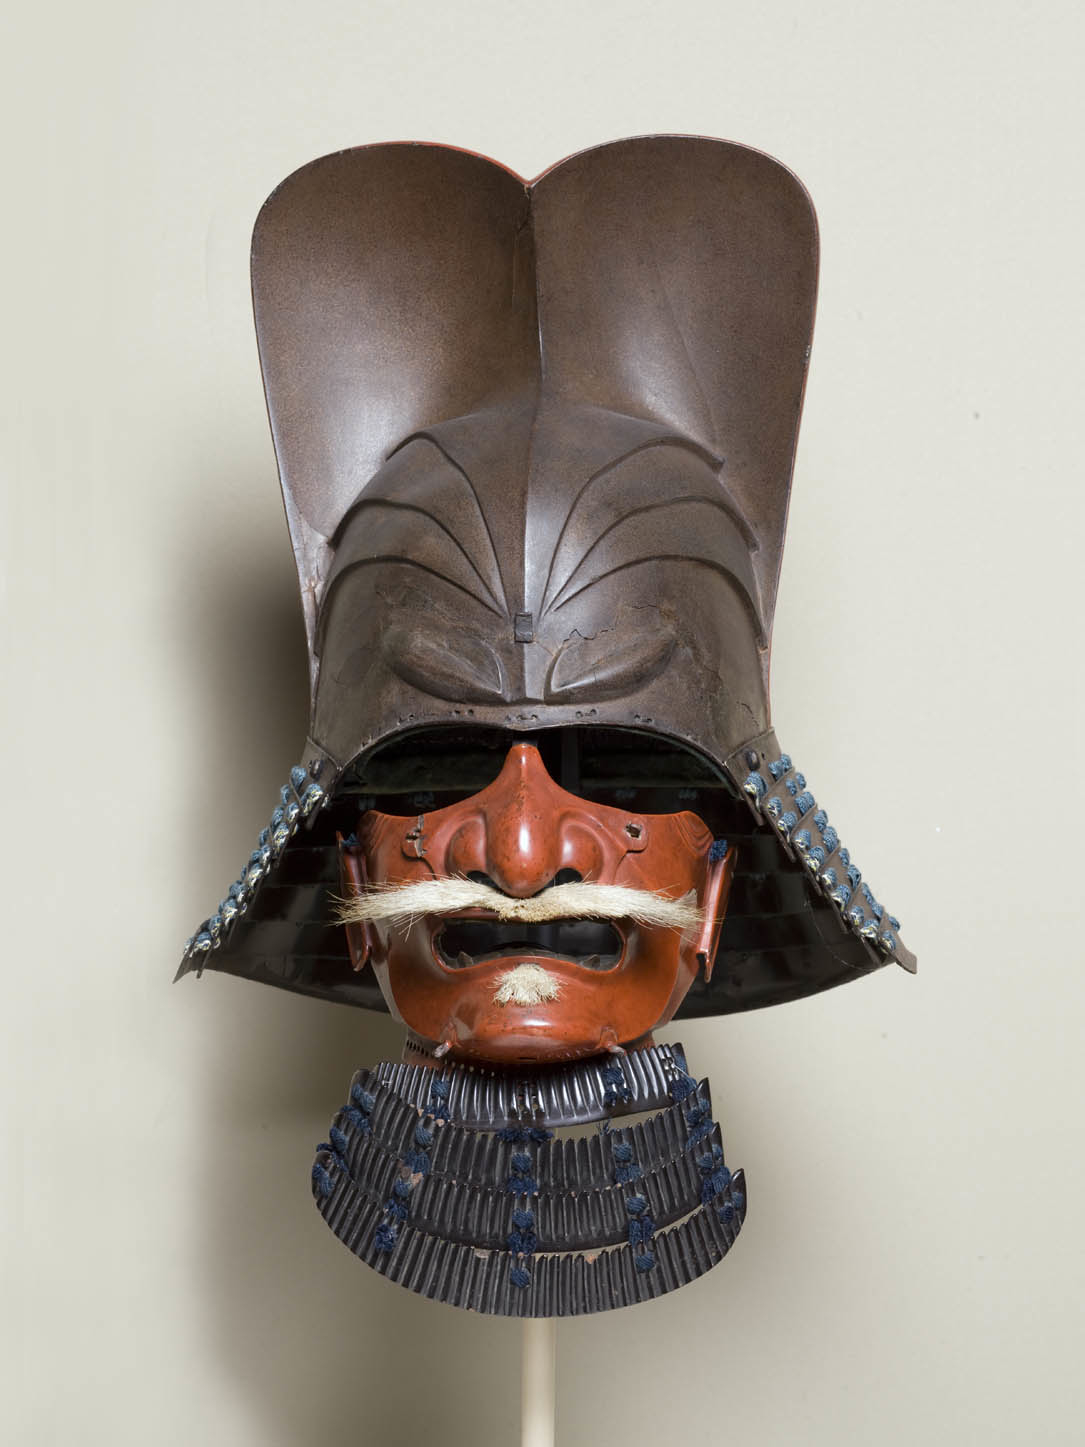 Helmet with half-face mask (article), Japan